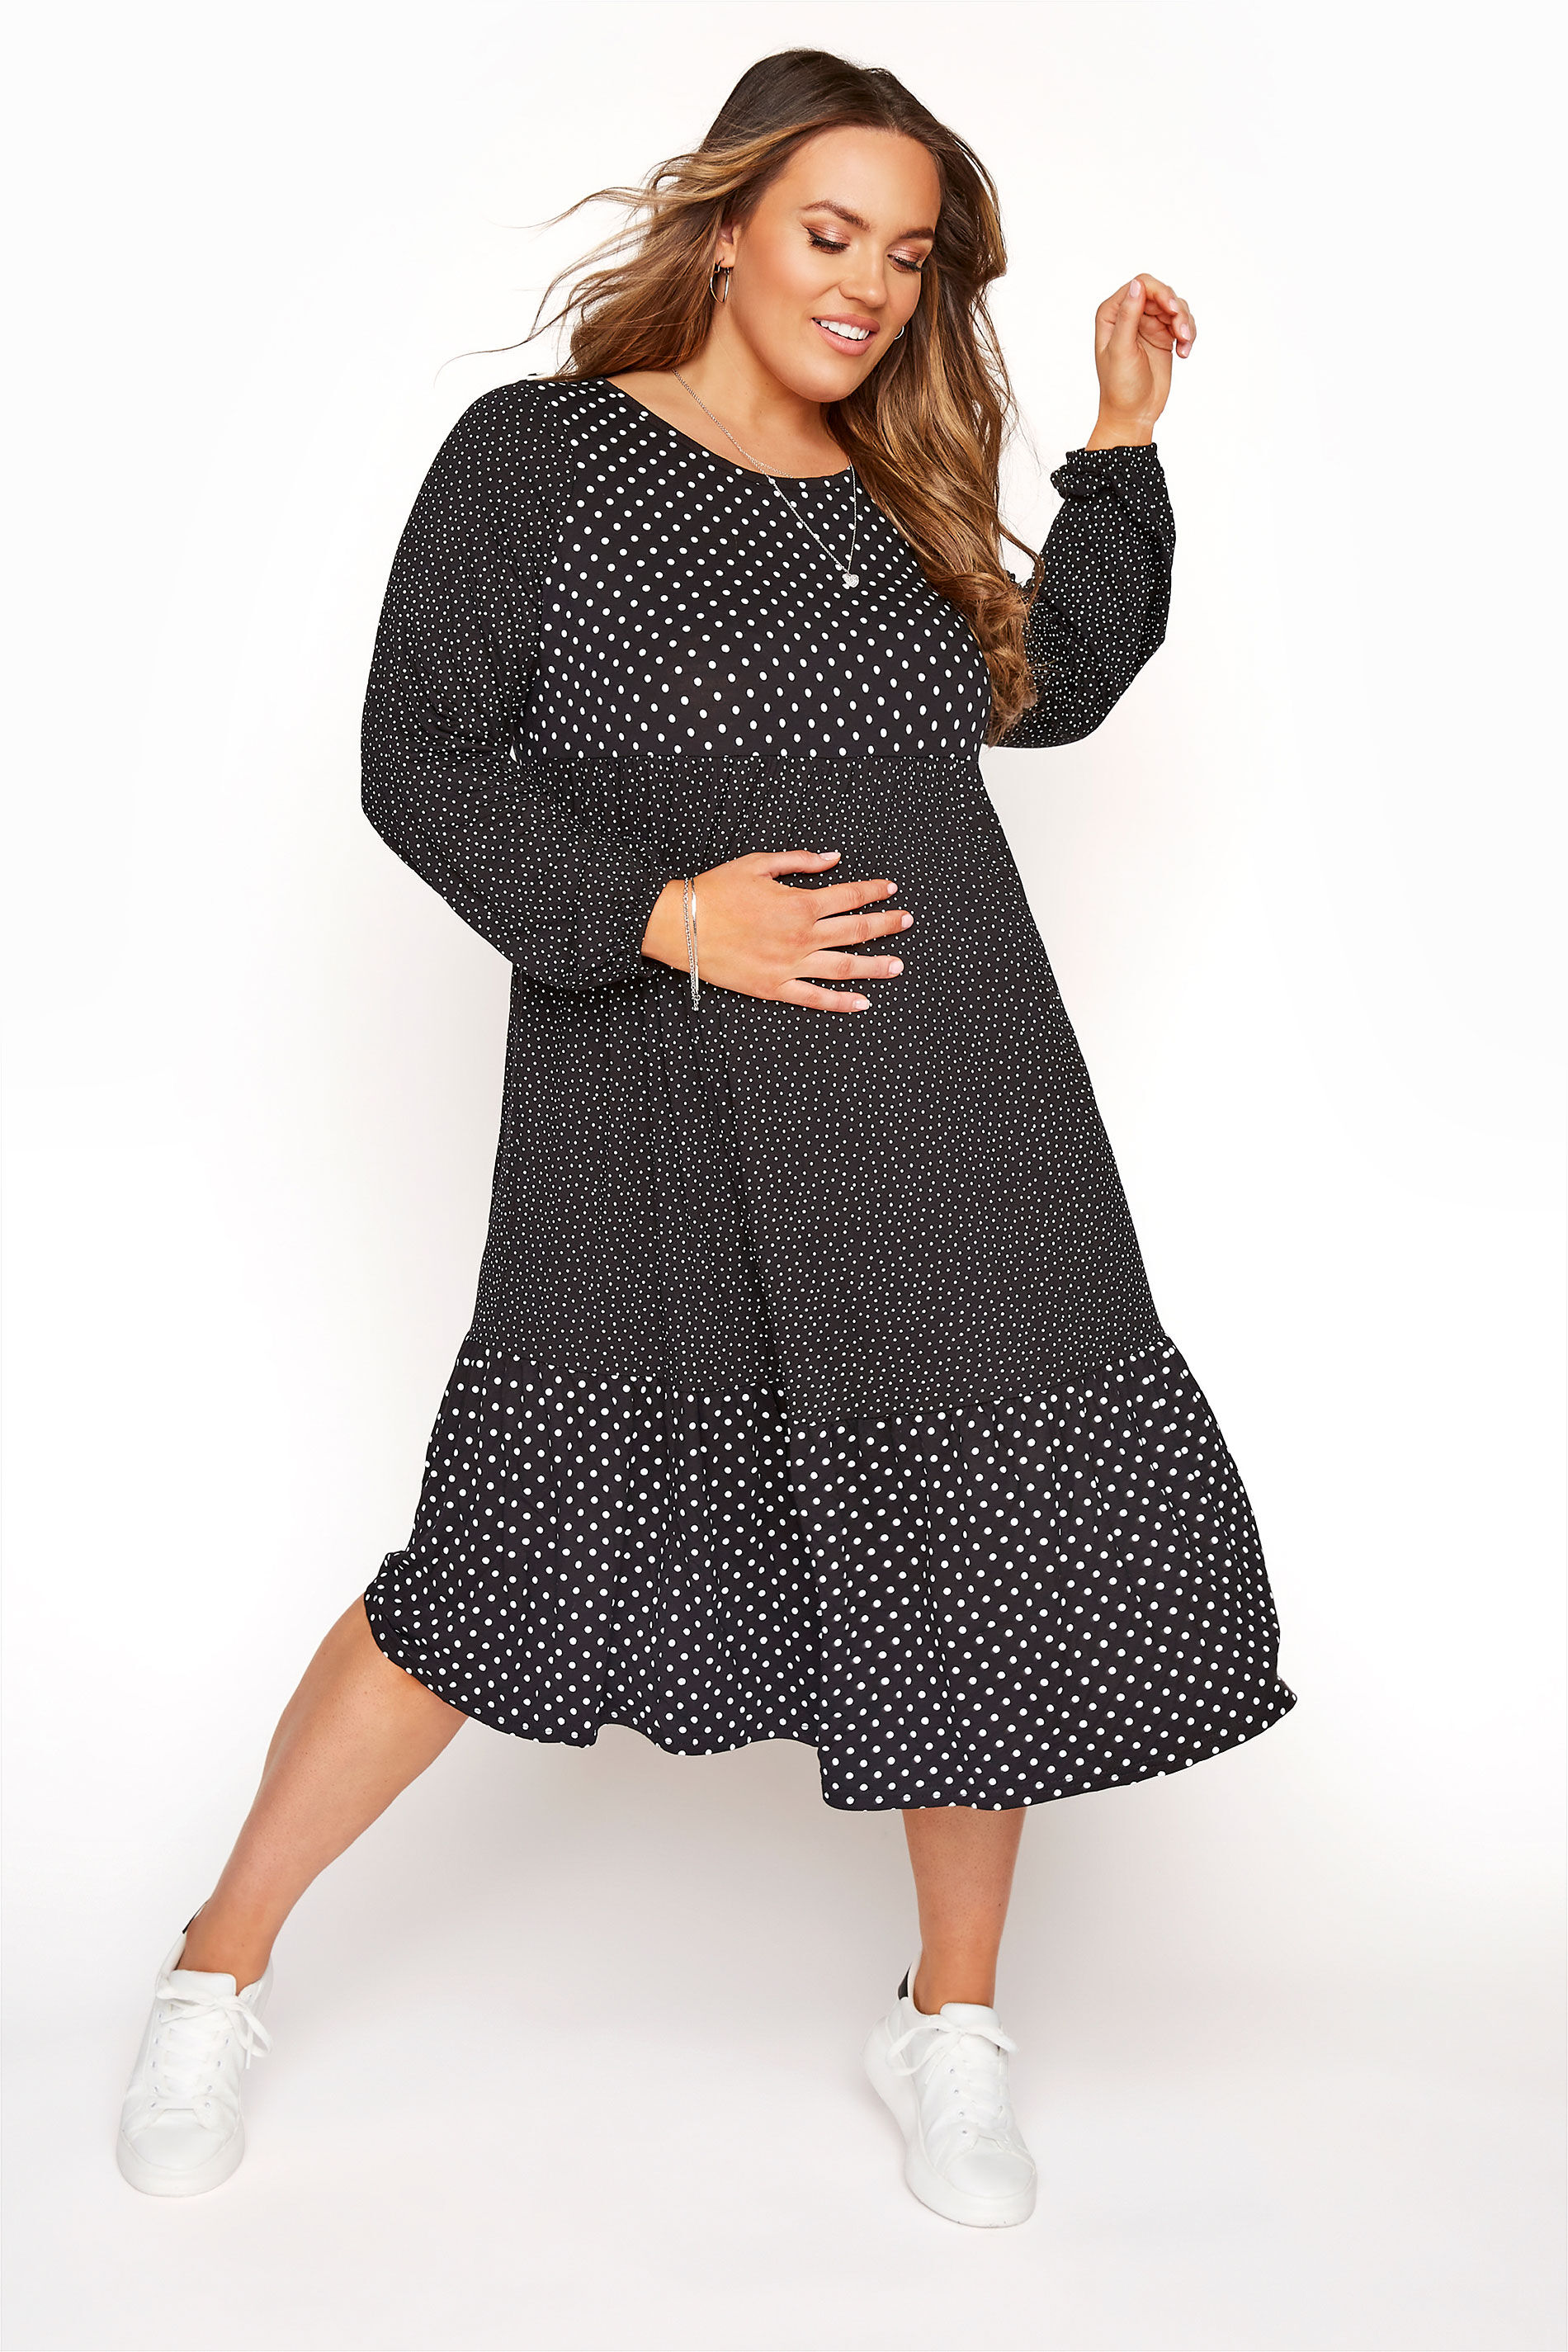 Yours Clothing Bump it up maternity black polka dot tiered midi dress